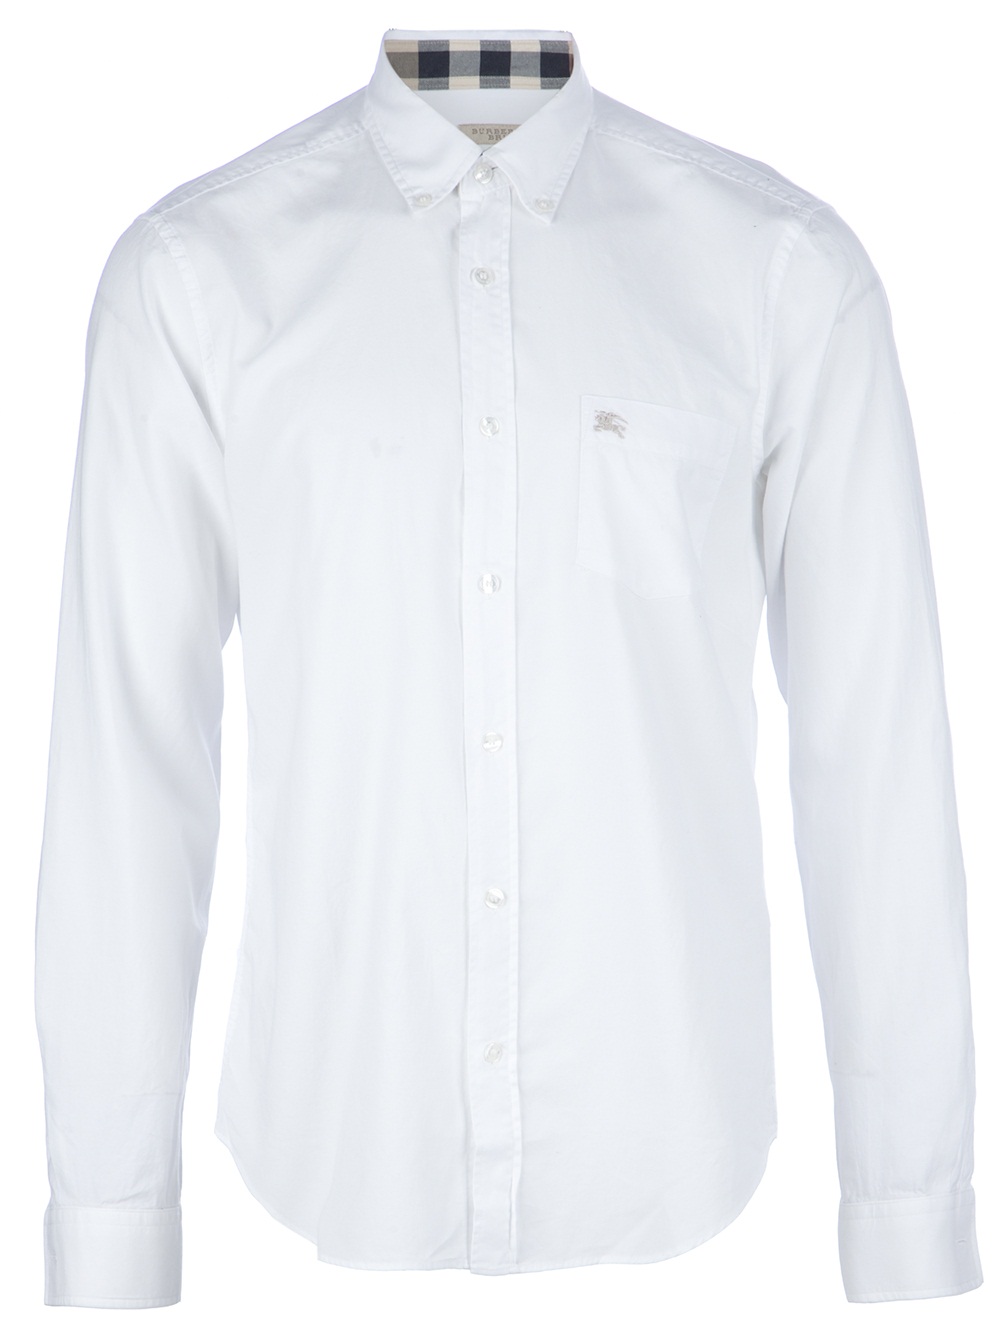 Burberry Brit Cotton Shirt in White for Men | Lyst